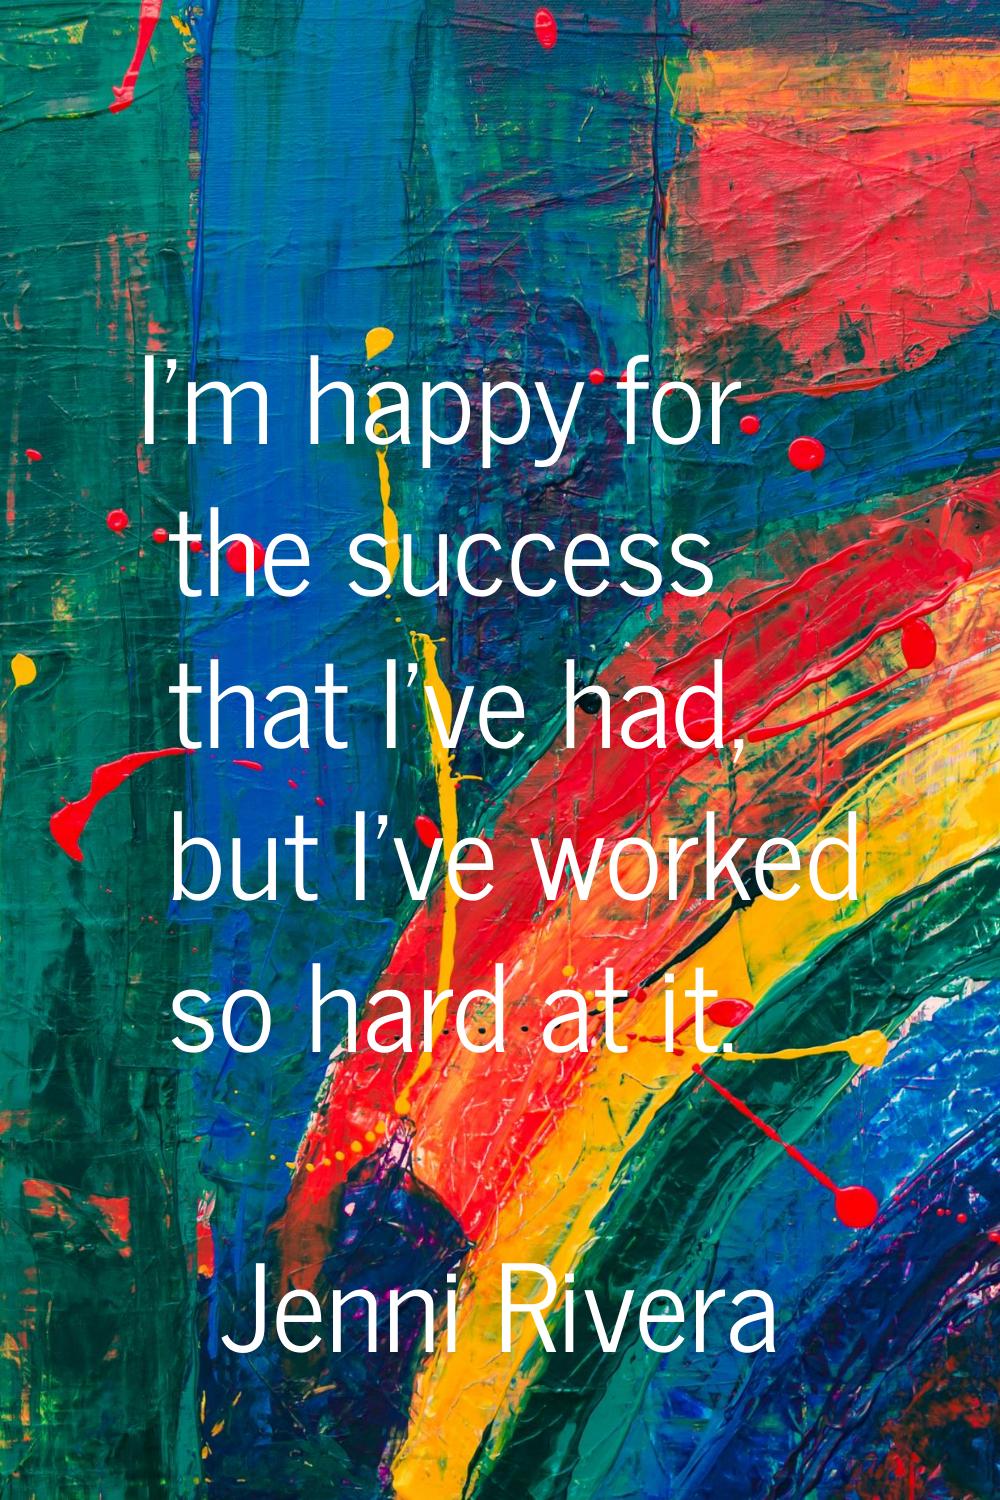 I'm happy for the success that I've had, but I've worked so hard at it.